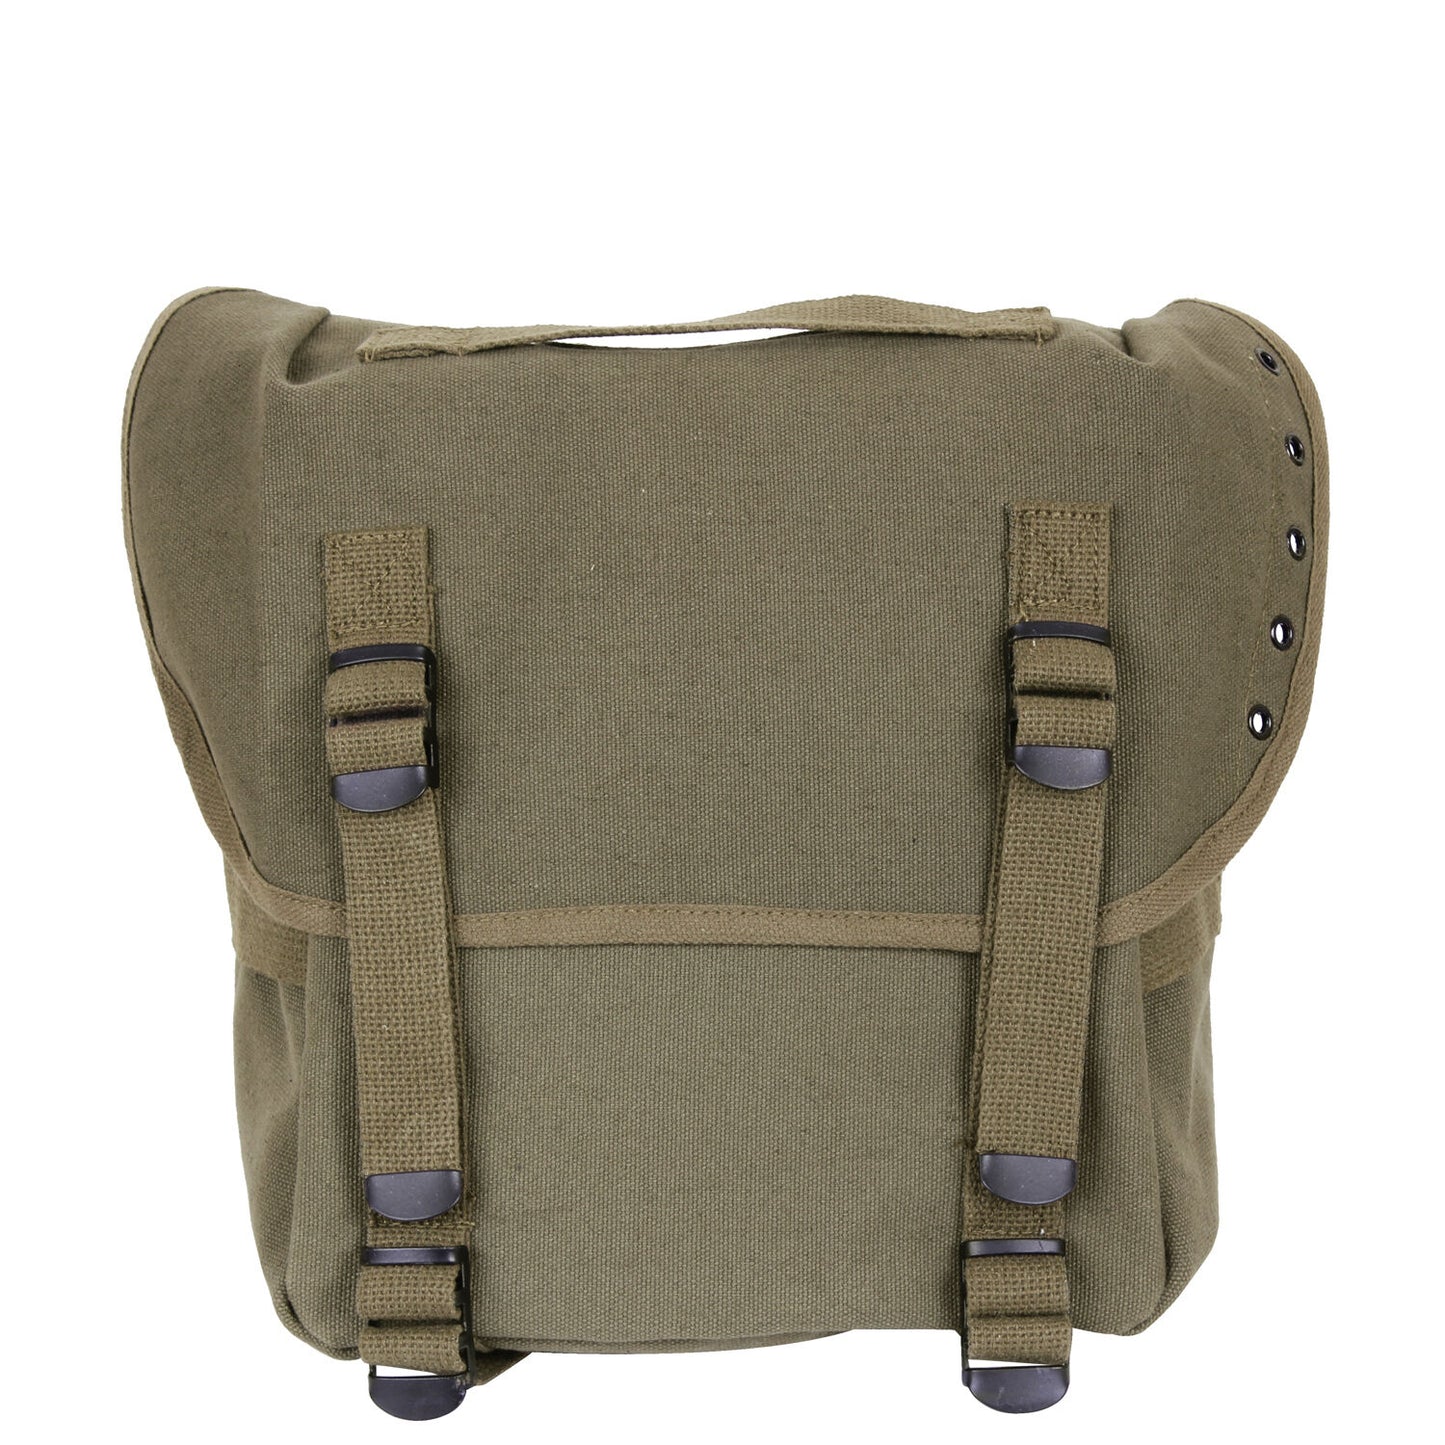 Rothco G.I. Military Style Canvas Butt Pack